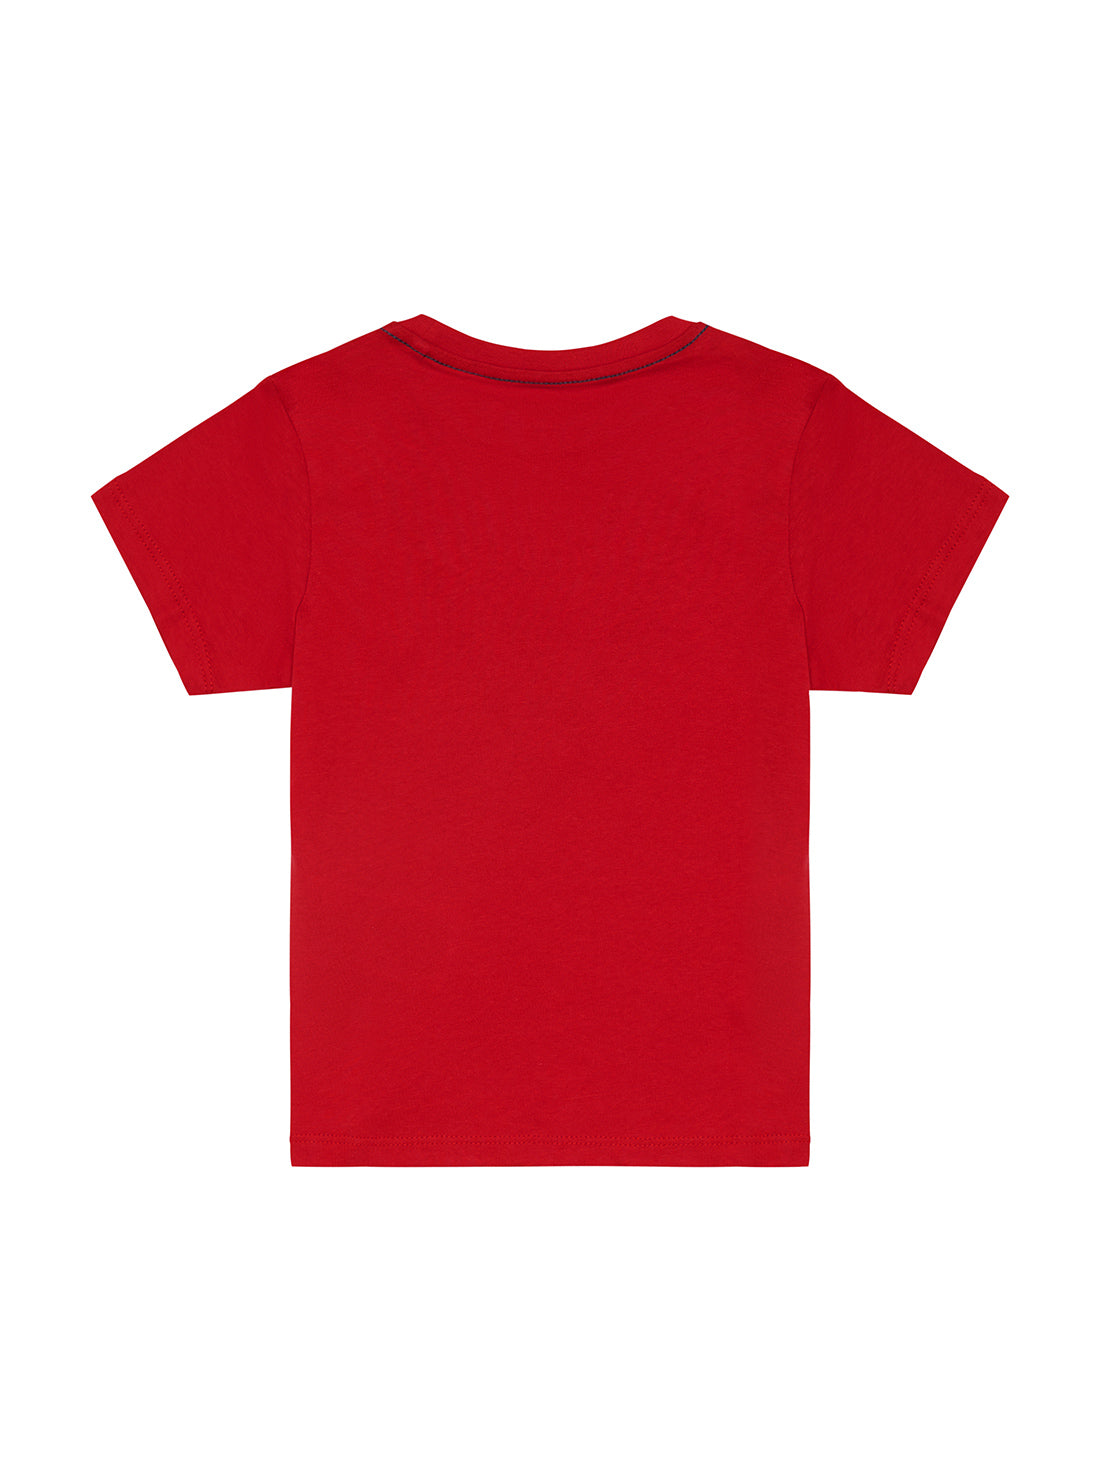 GUESS Little Boys Red Short Sleeve Triangle Logo Tee (2-7)  N73I55K5M20 Back View